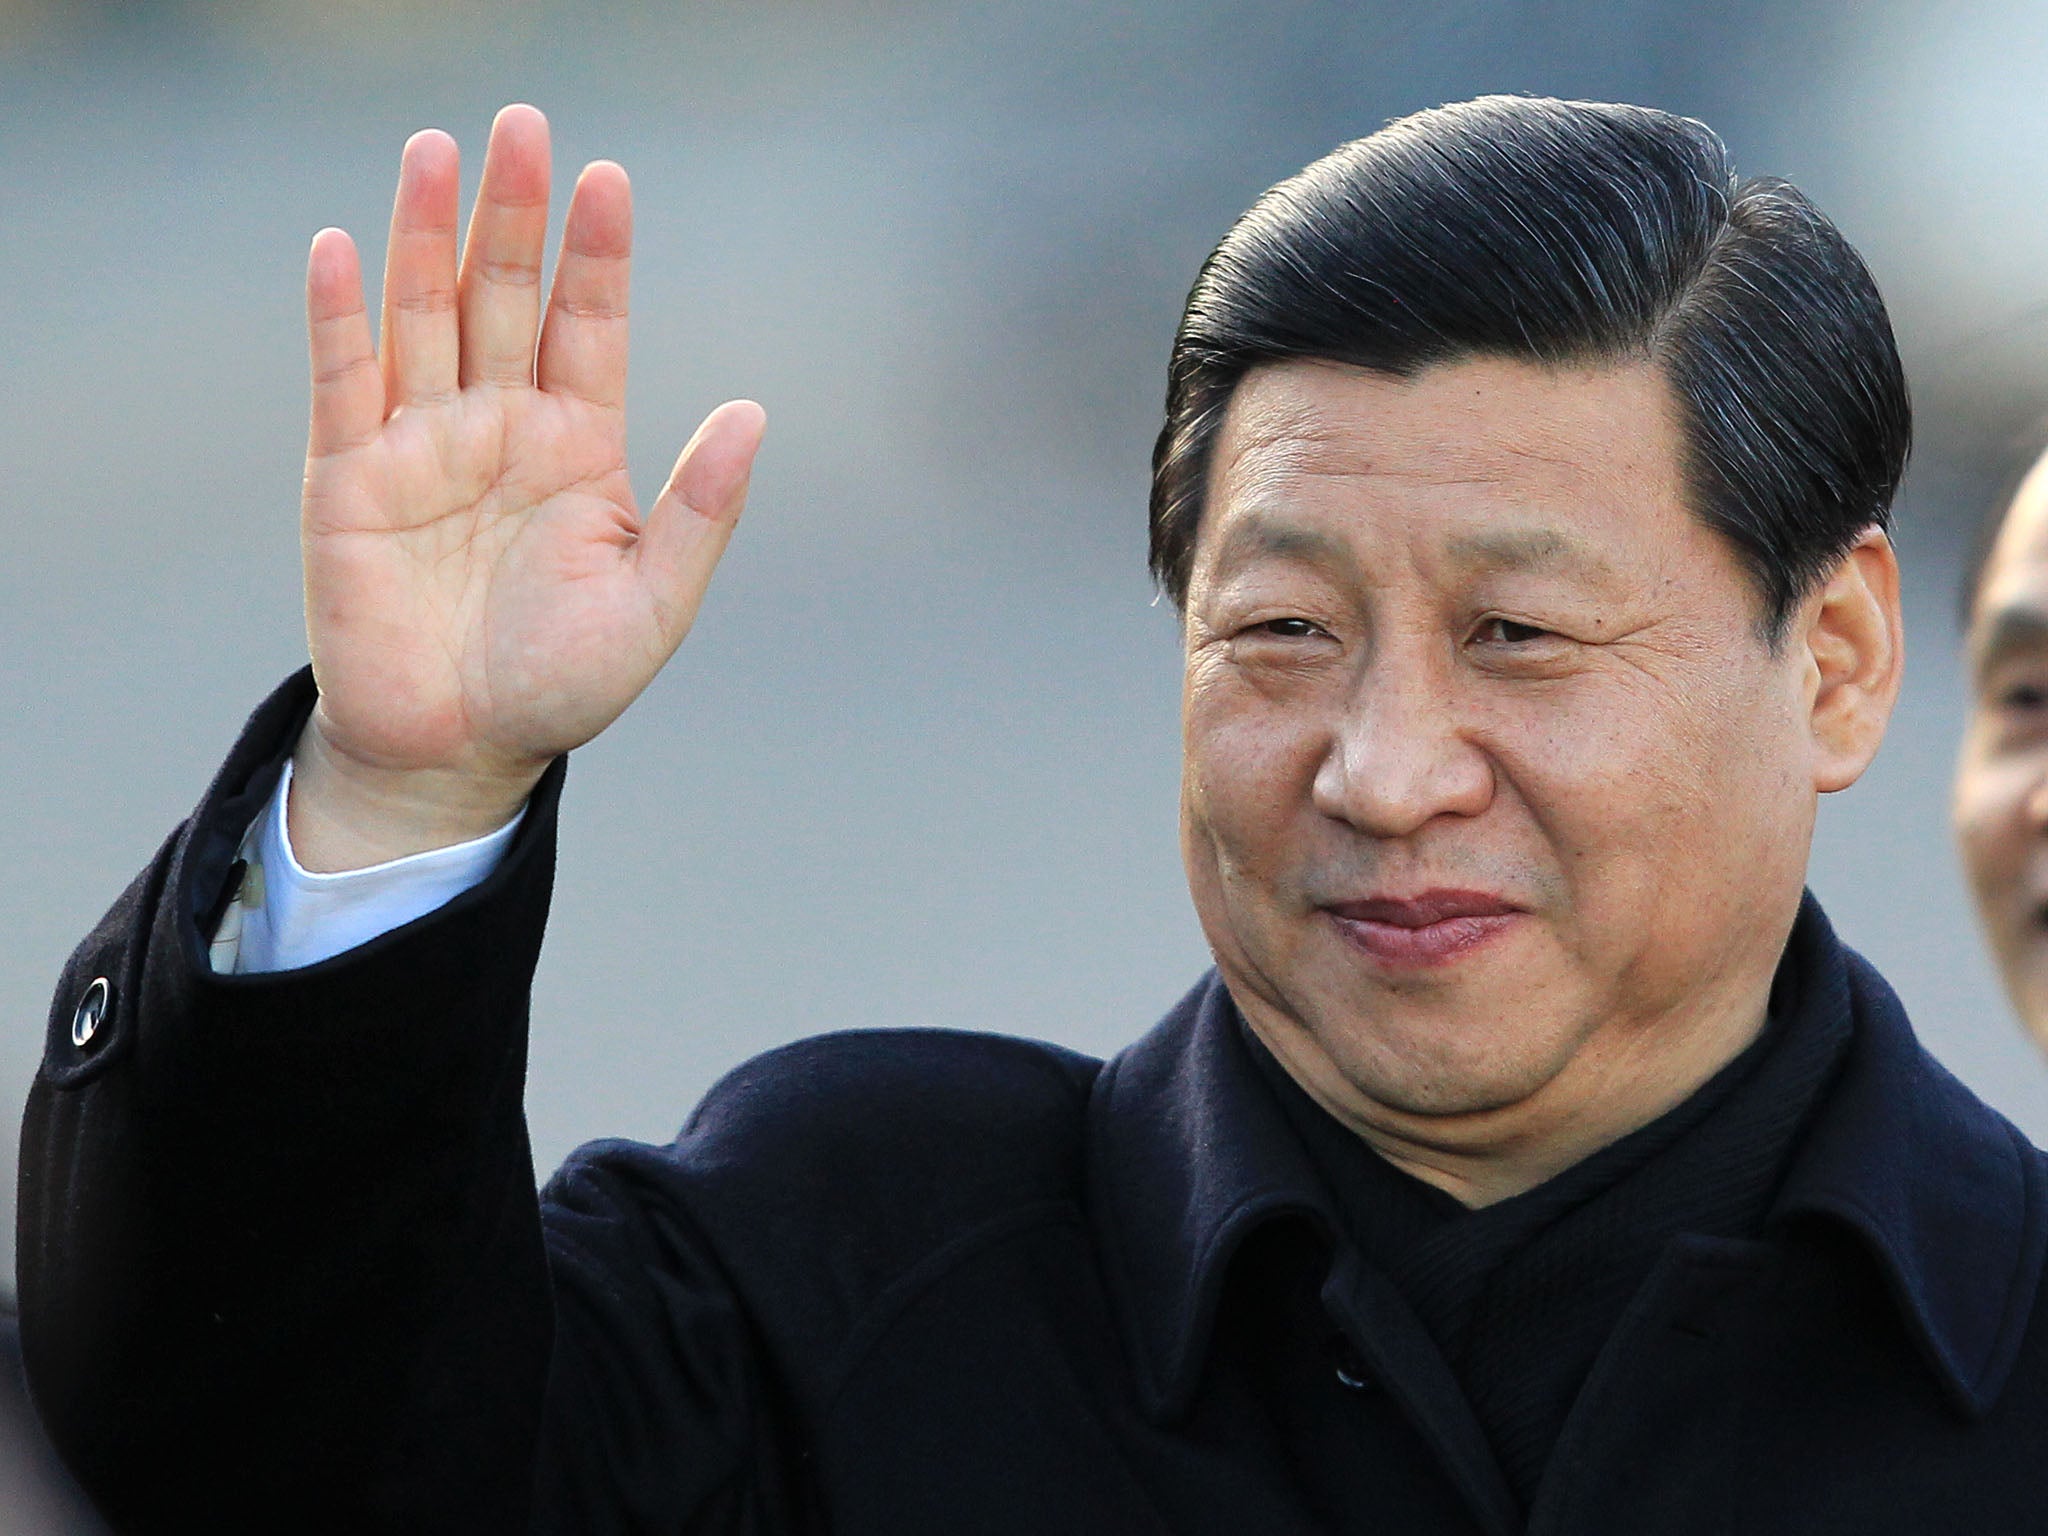 Communist Party leader Xi Jinping - now has his own fan club